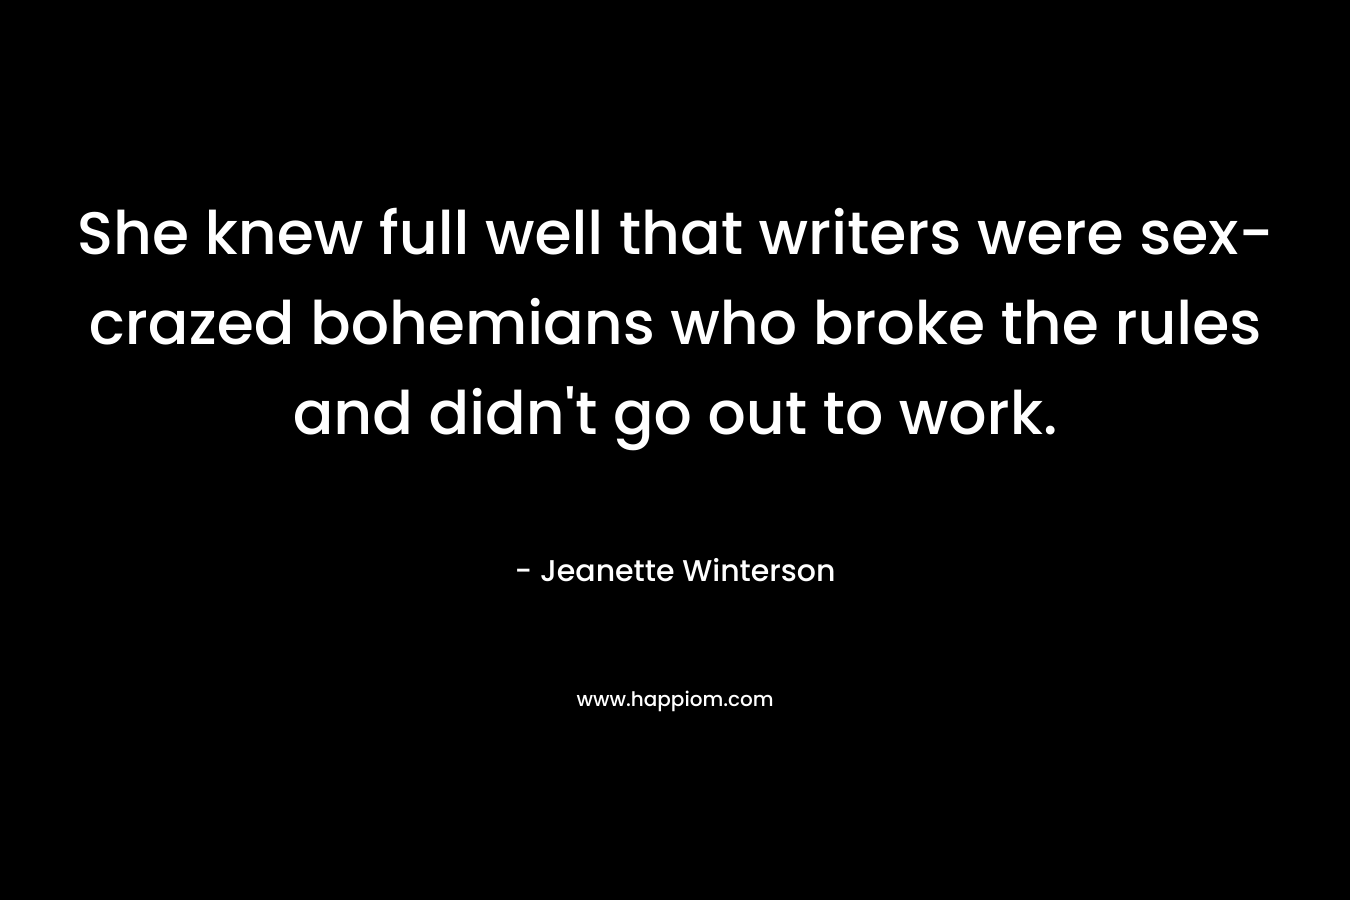 She knew full well that writers were sex-crazed bohemians who broke the rules and didn't go out to work.